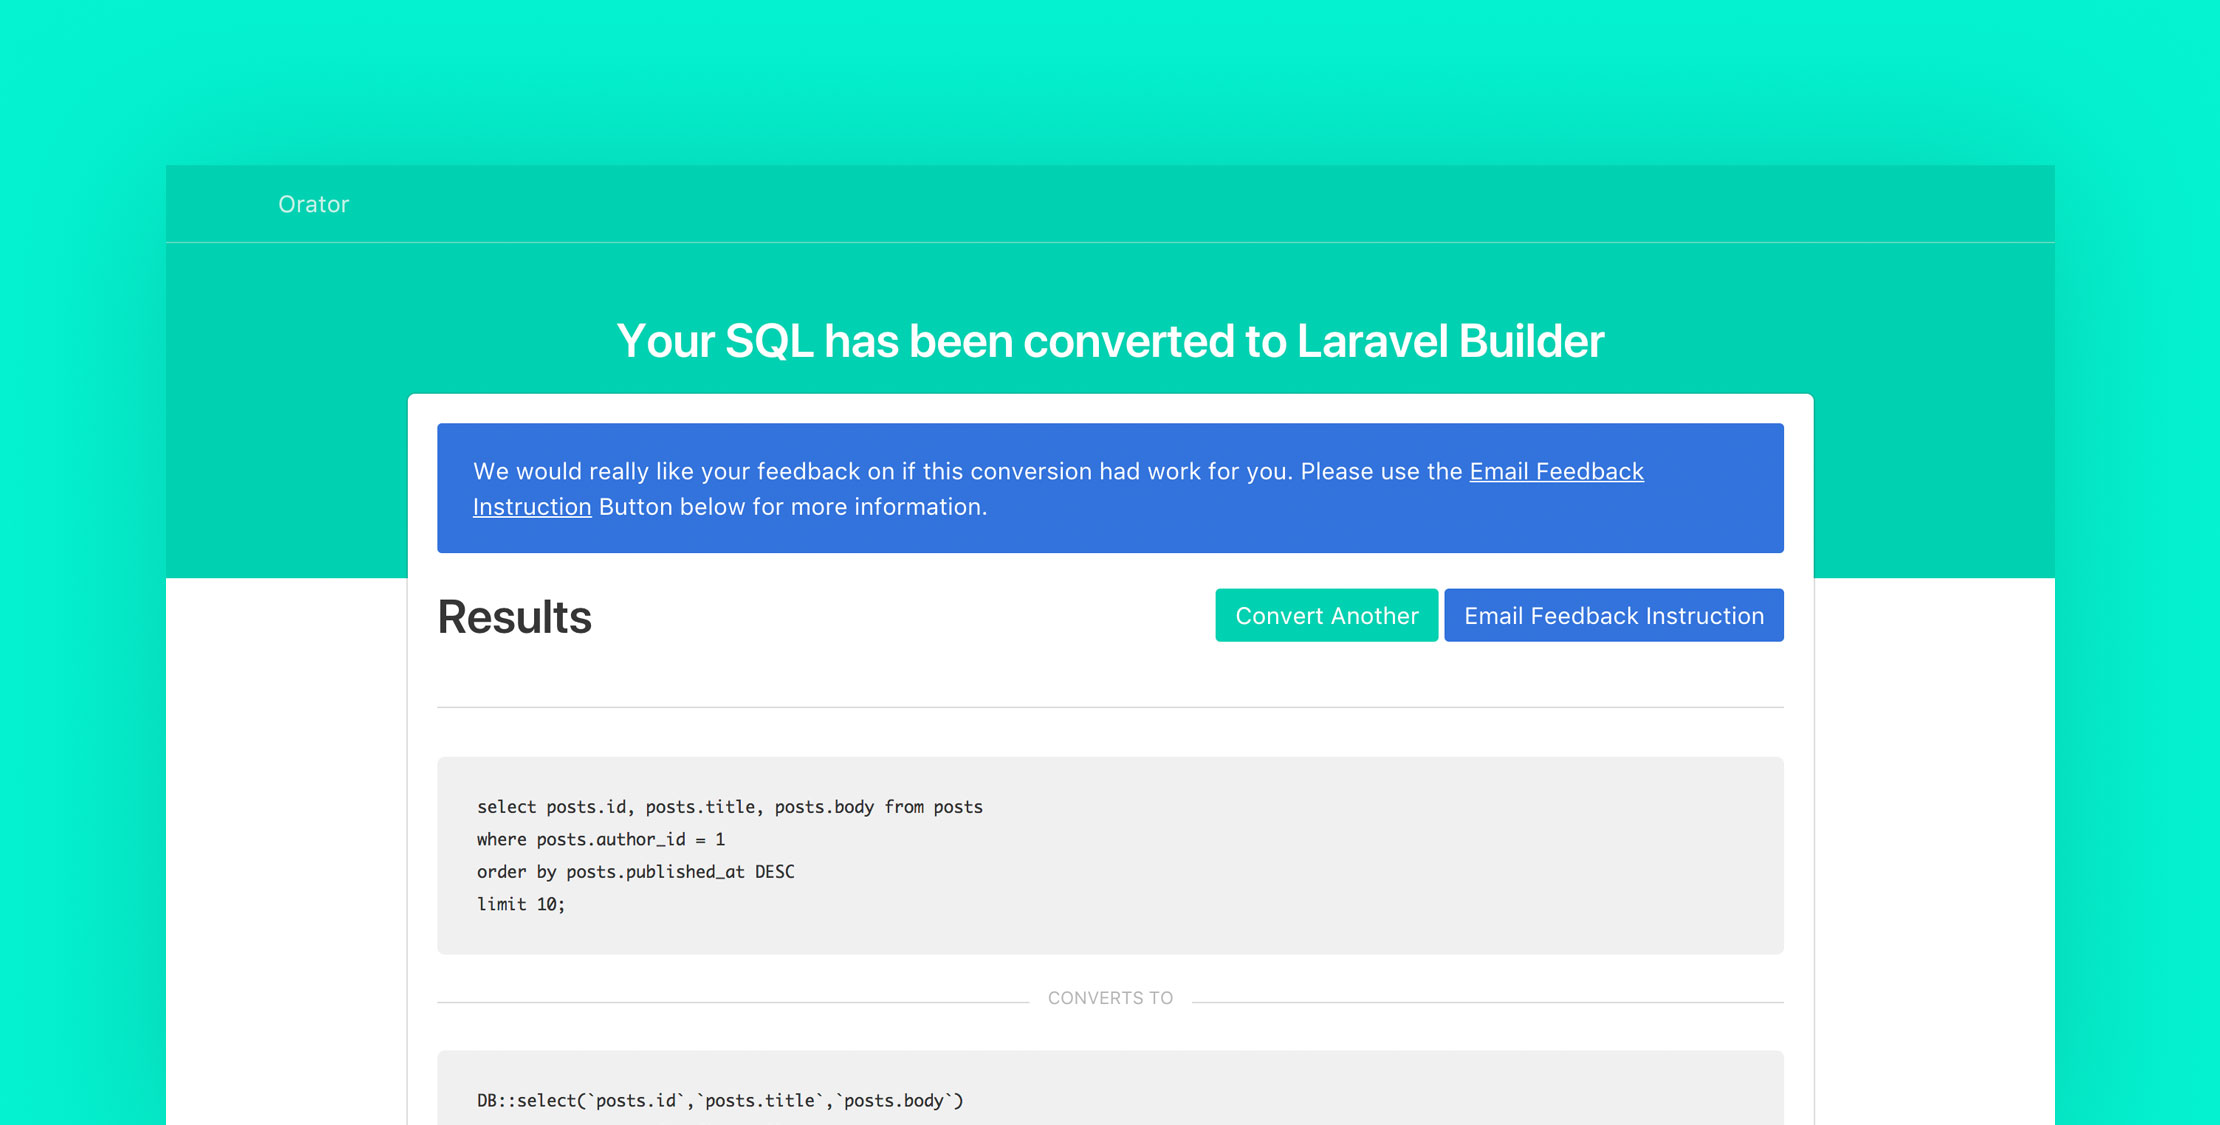 Convert Your SQL to Laravel Builder with Orator image